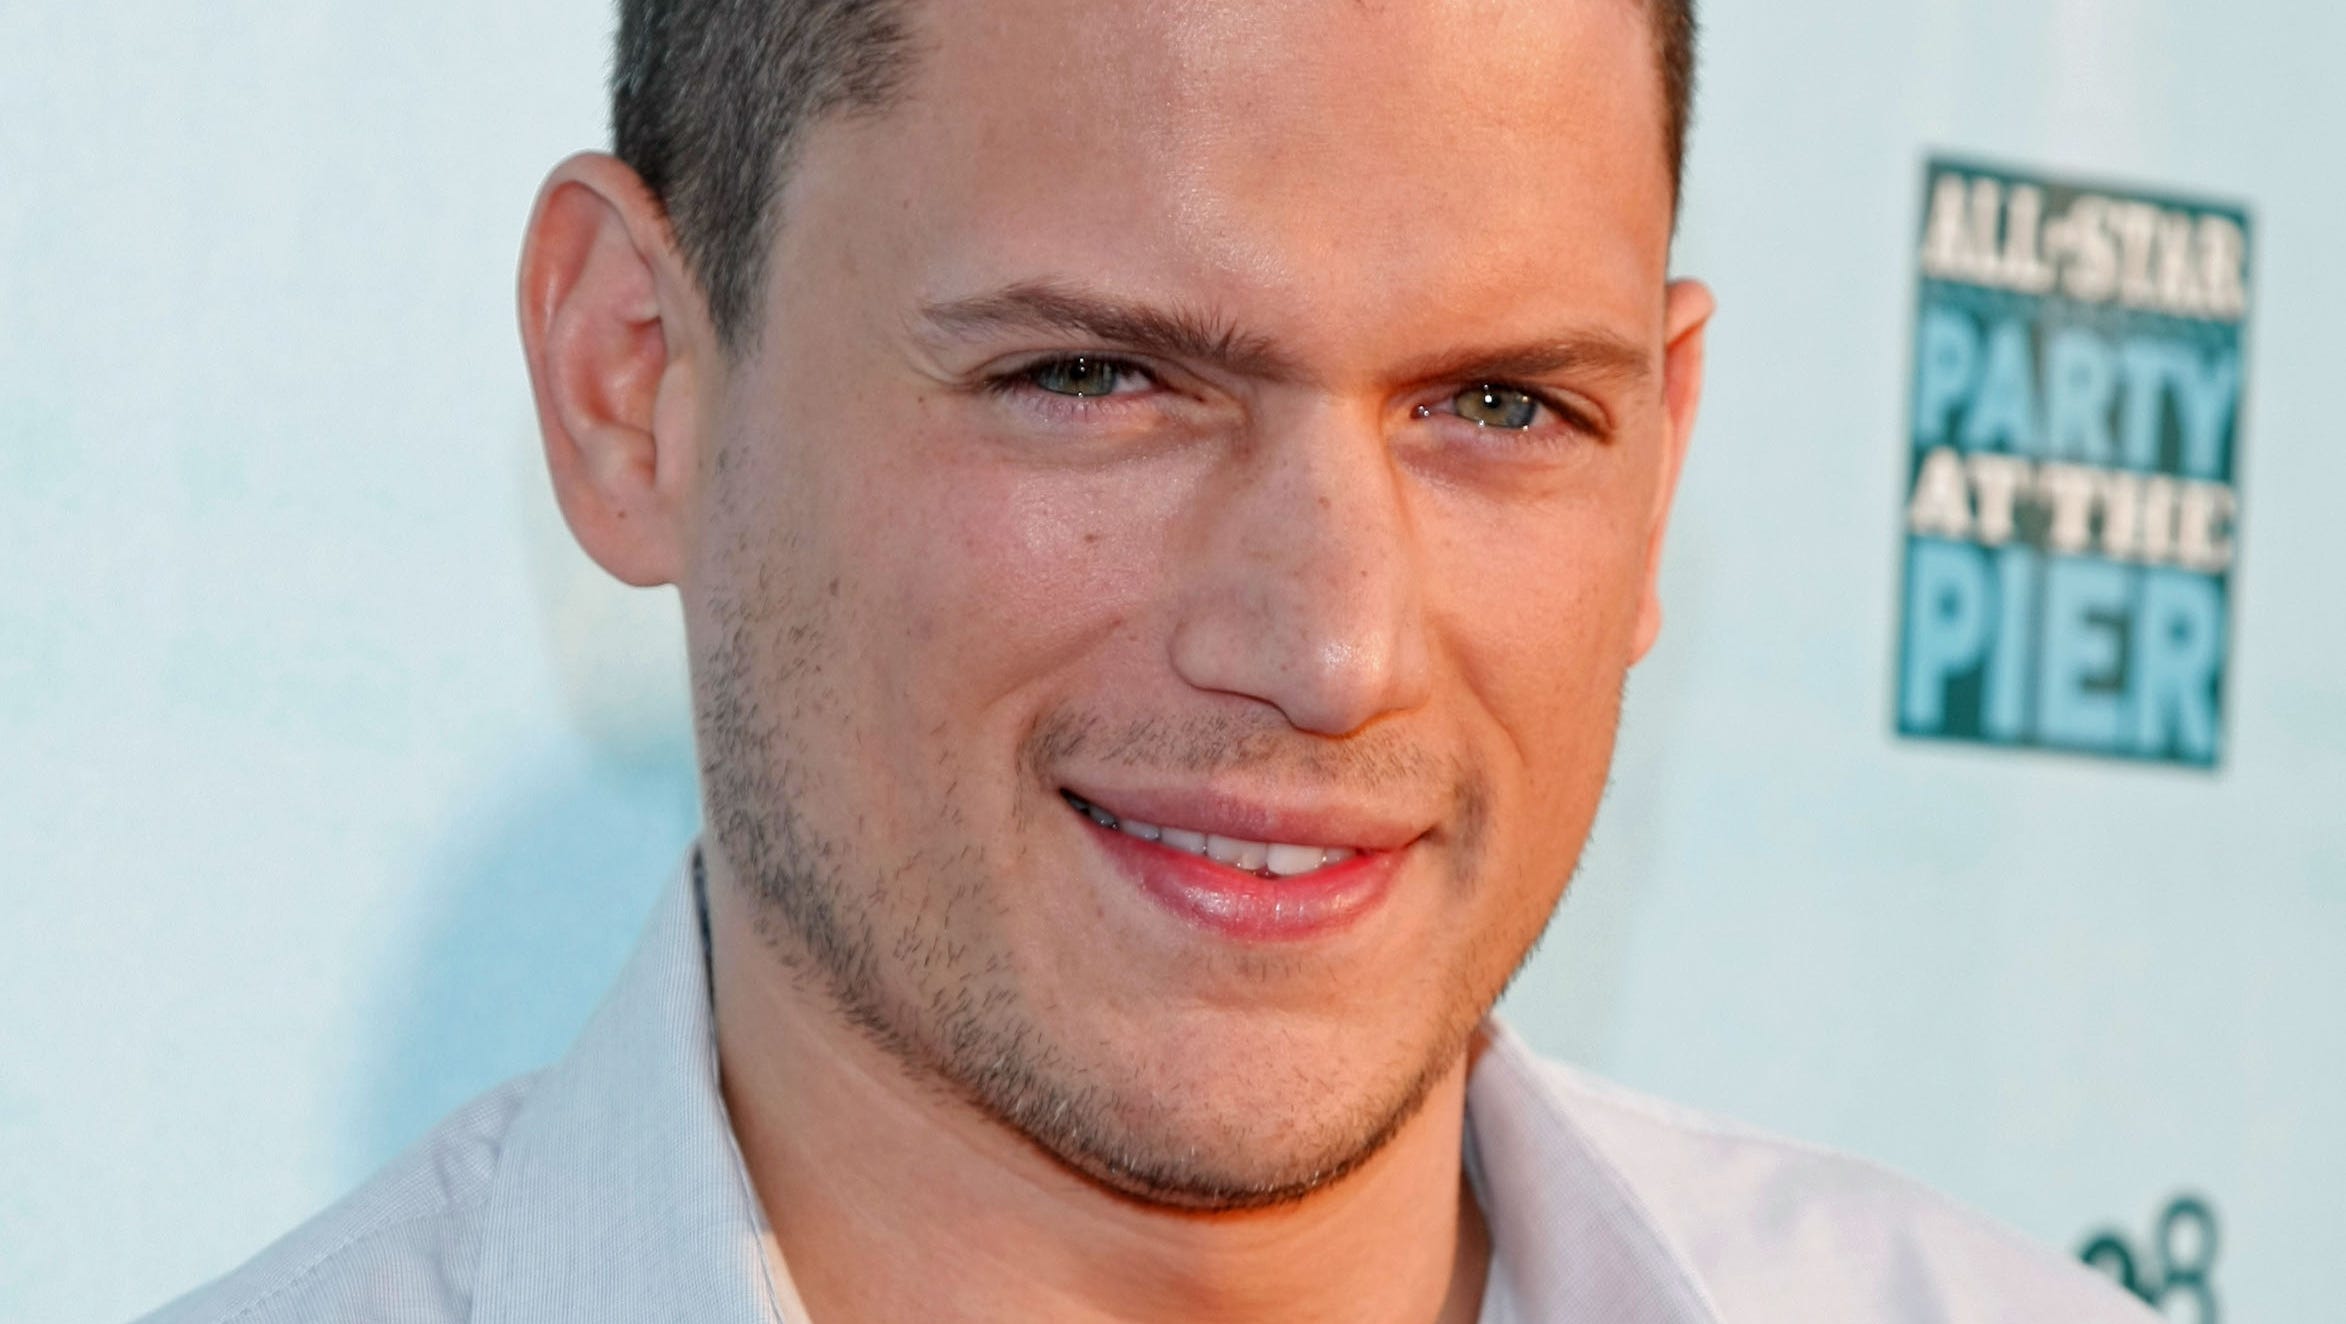 'Prison Break' star Wentworth Miller reveals he has autism: 'This isn't something I'd change' - USA TODAY